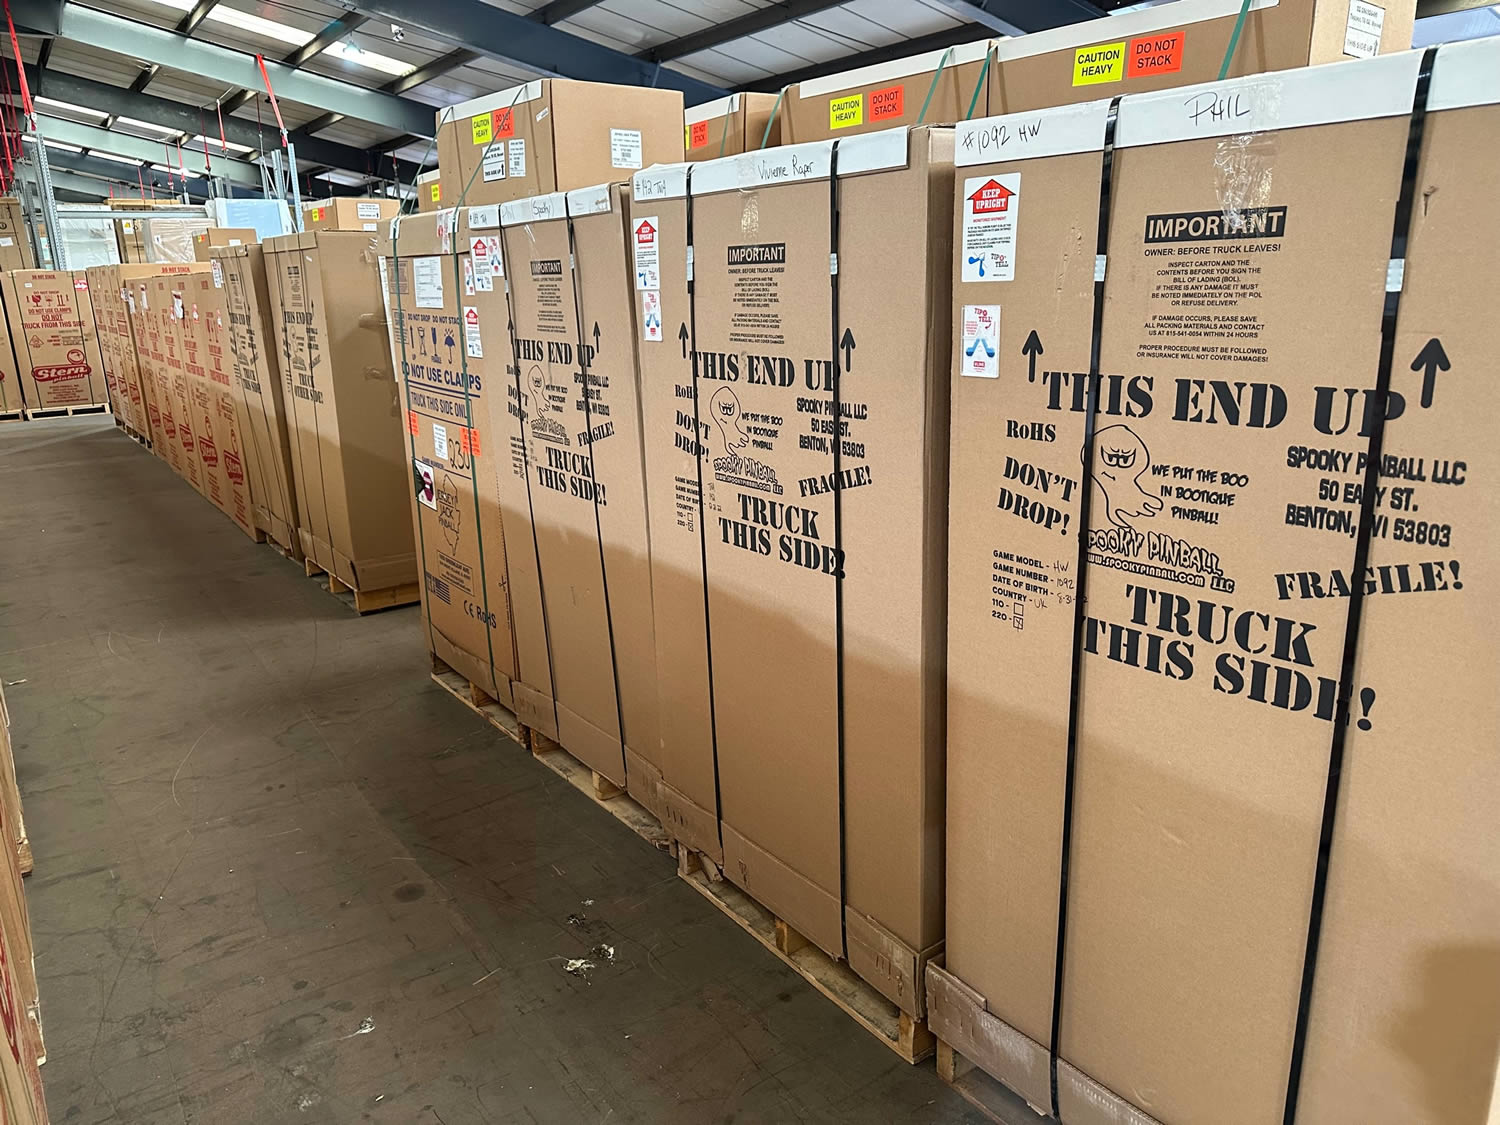 New Arrivals at our Pinball Machine Warehouse